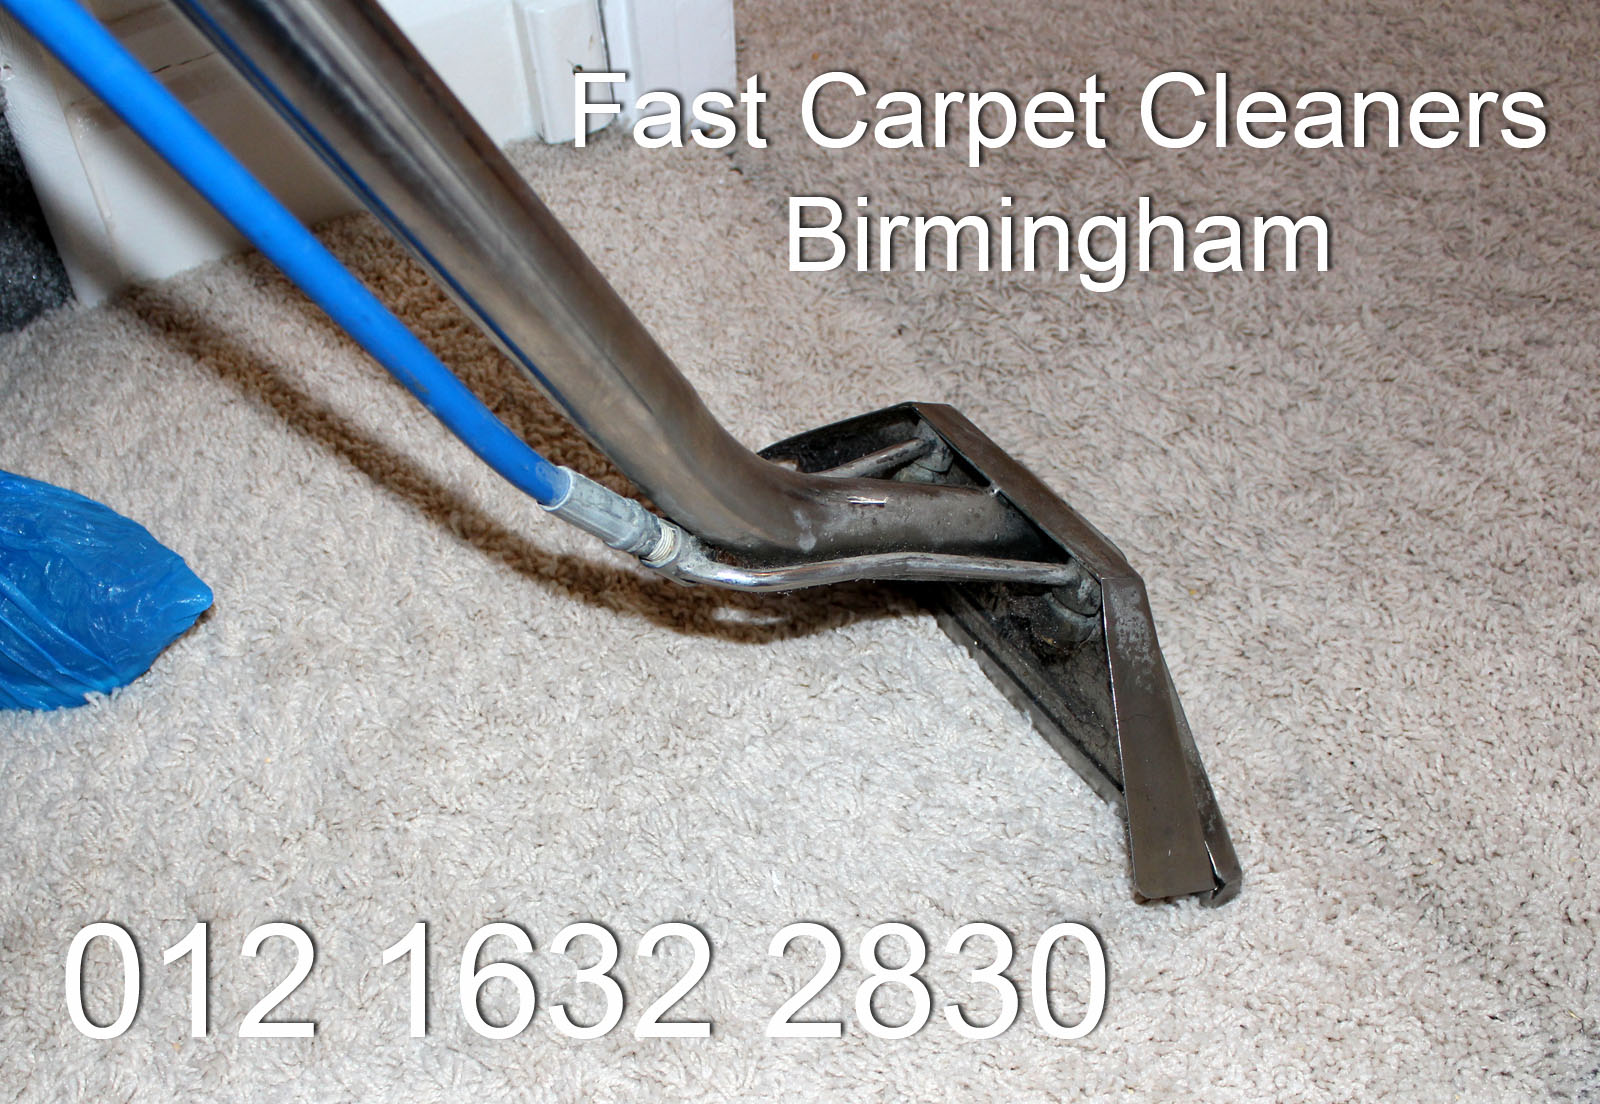 Carpet-Cleaners-Cleaning-Birmingham